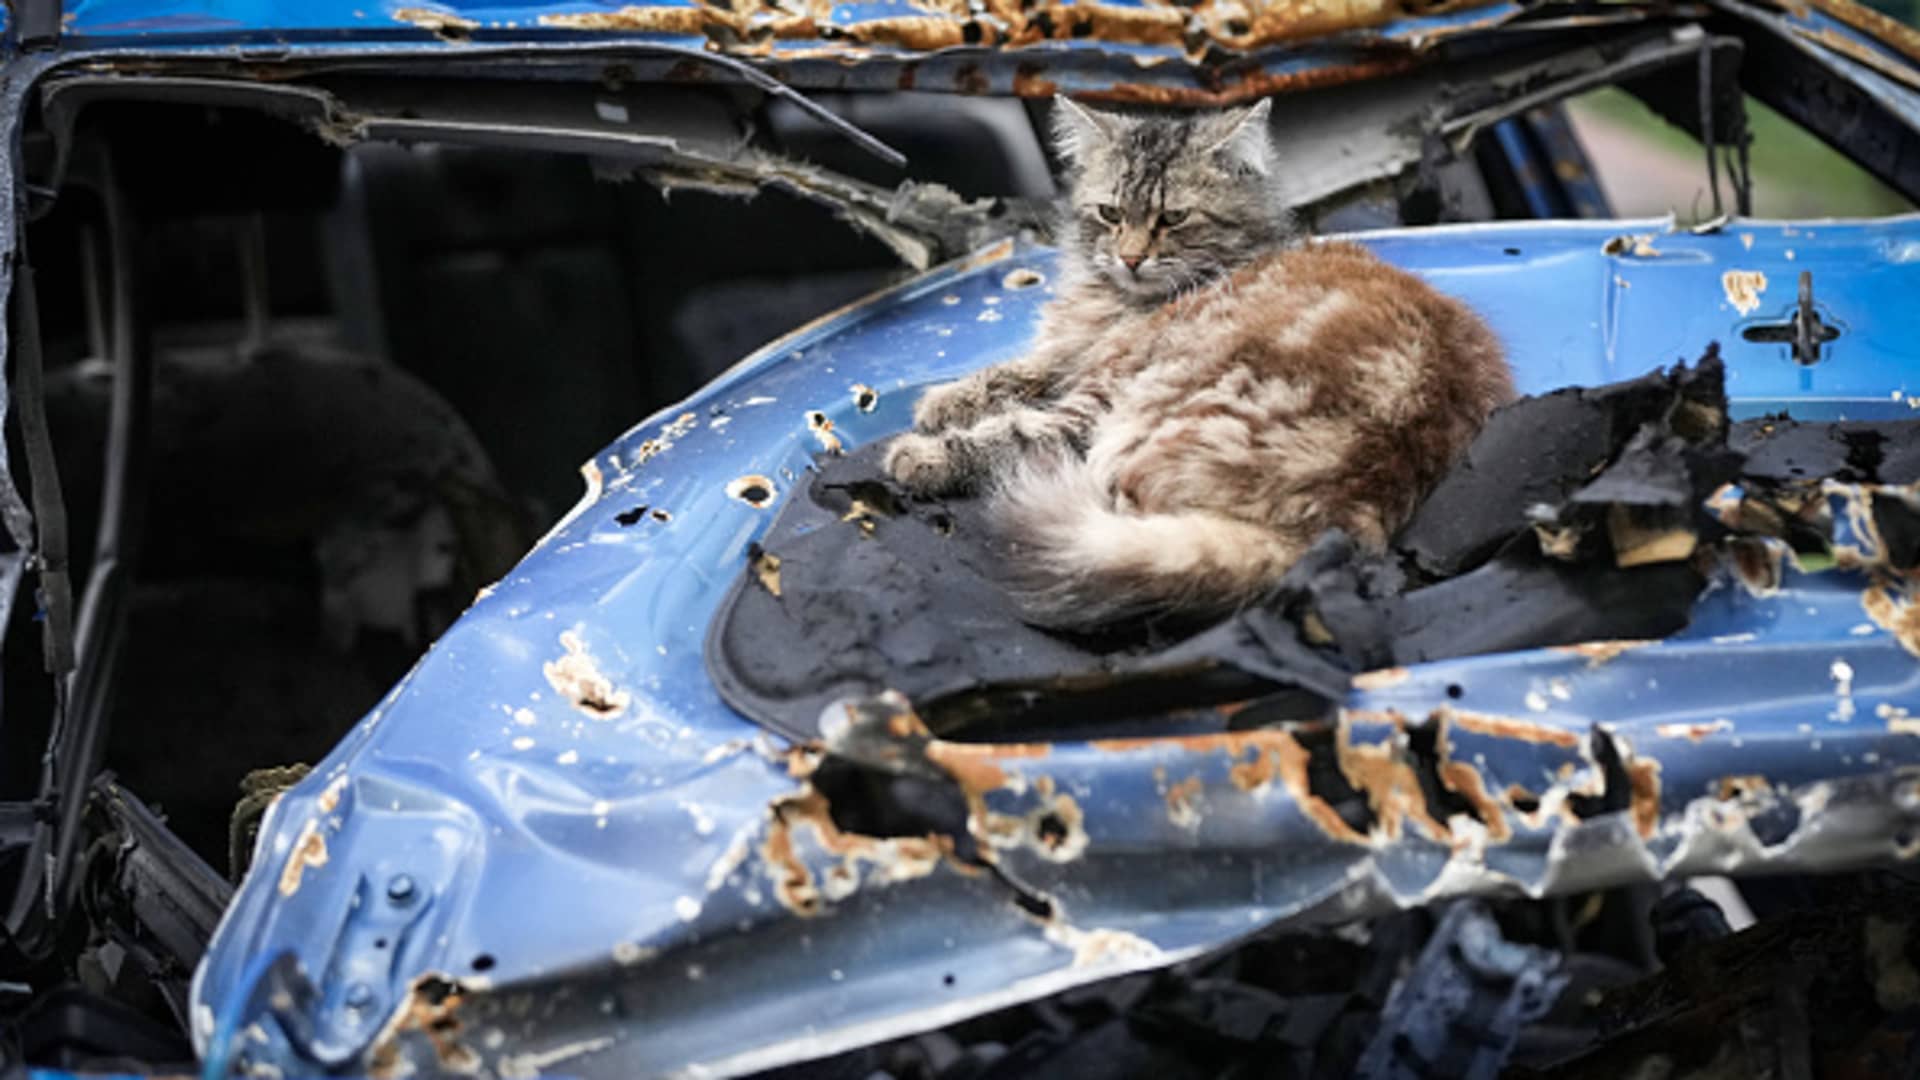 A cat slumbers on a war destroyed car on May 26, 2022 in Irpin, Ukraine.